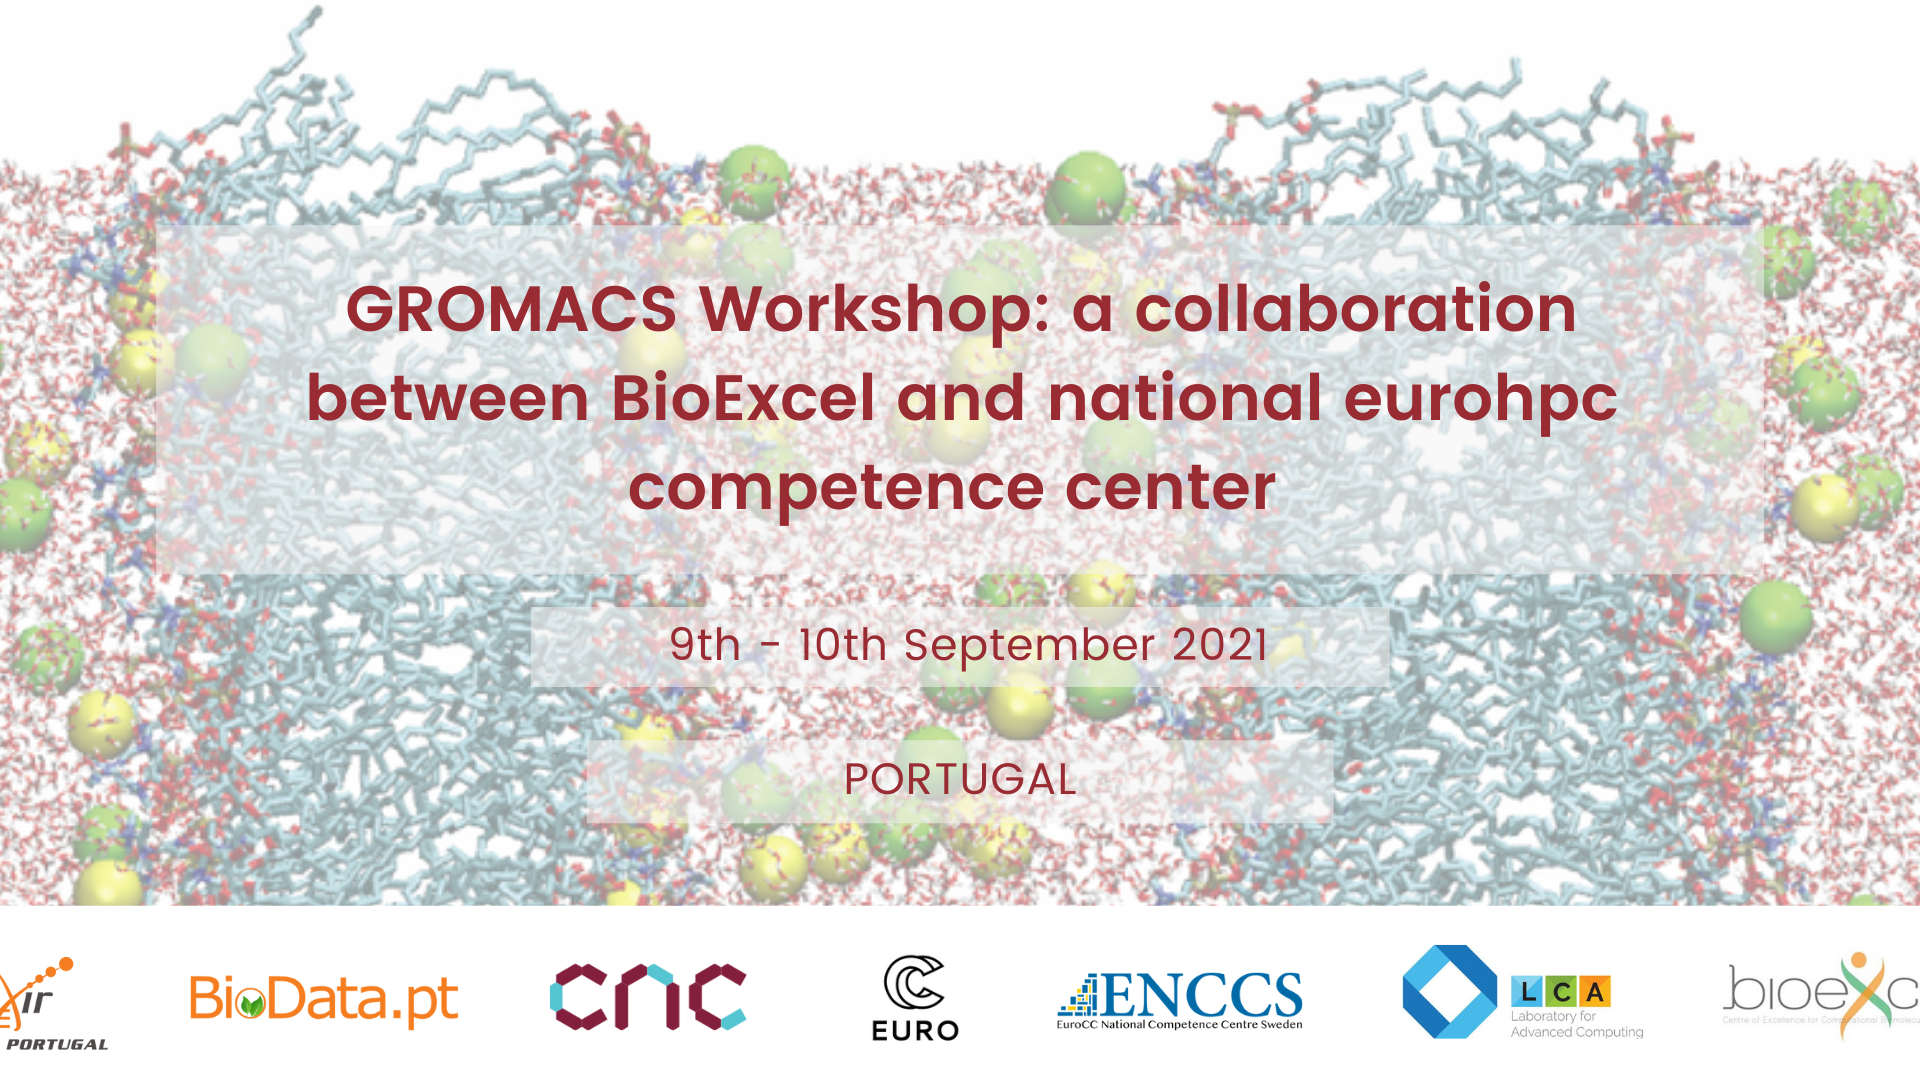 GROMACS Workshop: a collaboration between BioExcel and national eurohpc competence center